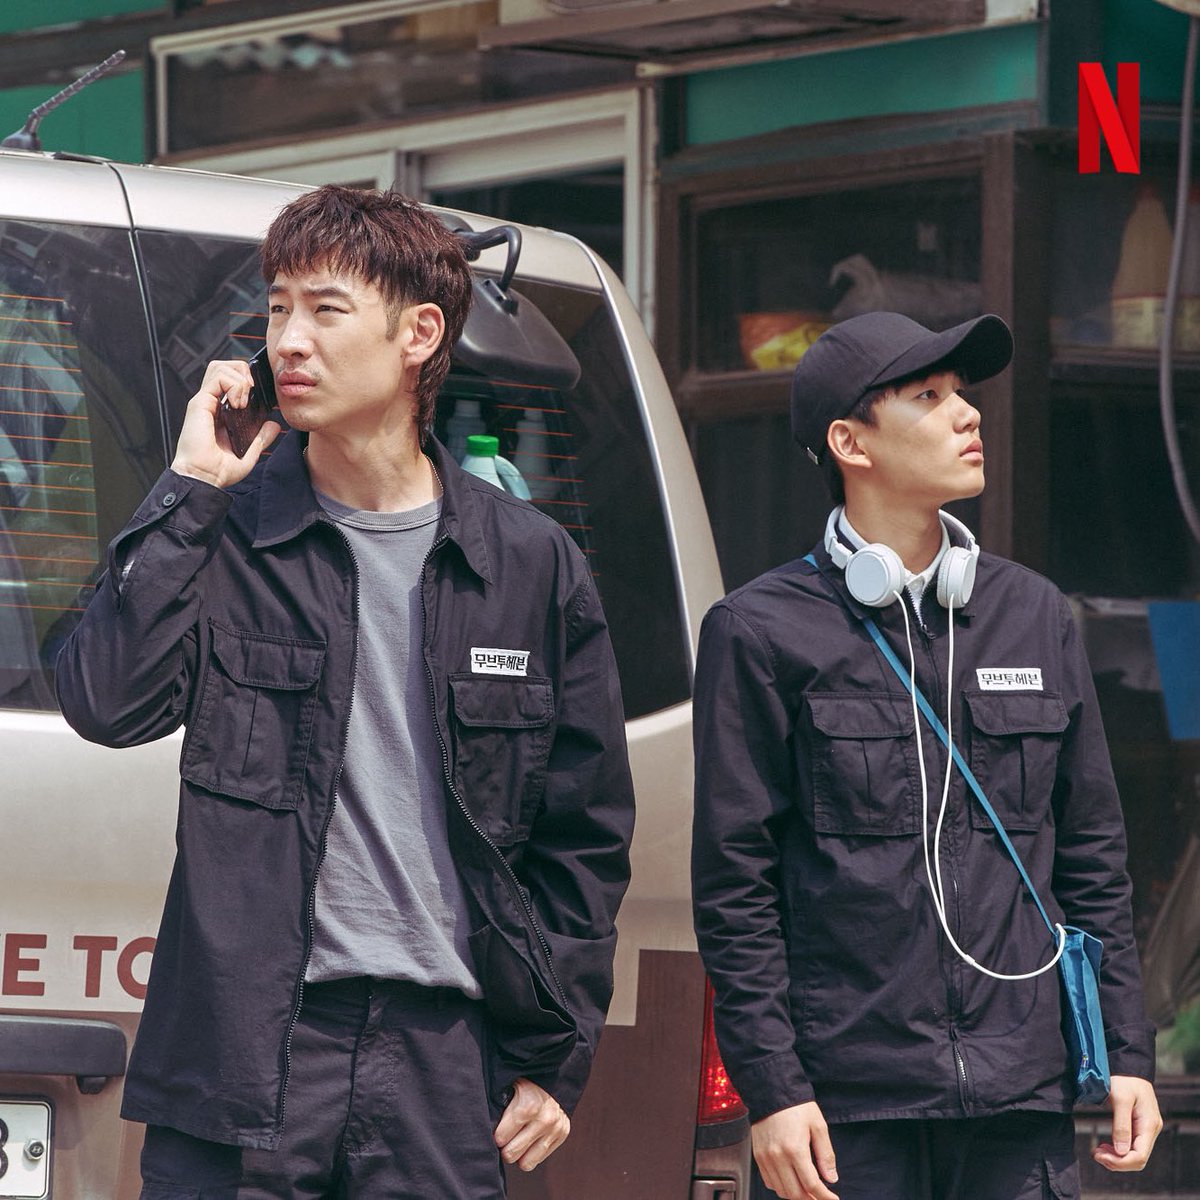 First look for Netflix Original Series #MoveToHeaven starring #LeeJeHoon #TangJoonSang #HongSeungHee

A story between a young man who has an Asperger’s syndrome and his uncle as they ran a trauma cleaning service 🔥